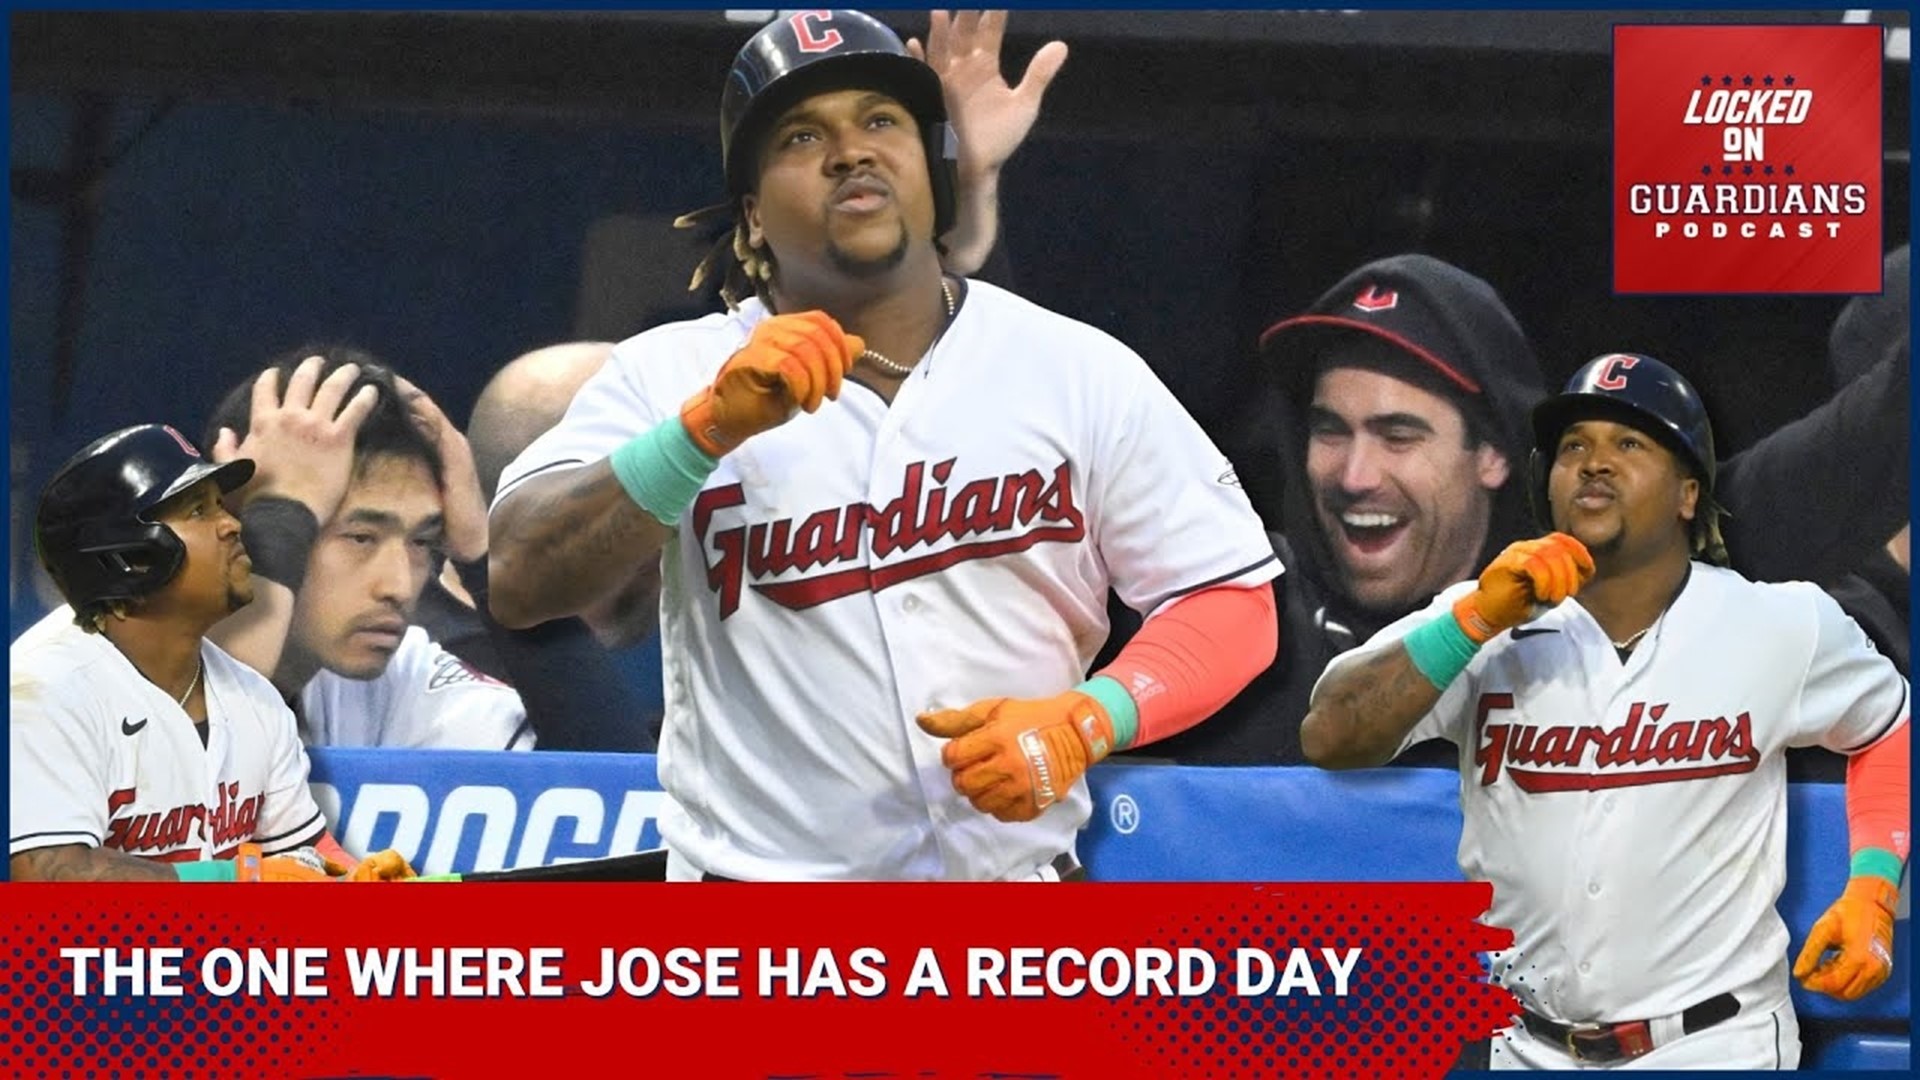 Jose Ramirez homers three times for Cleveland Guardians